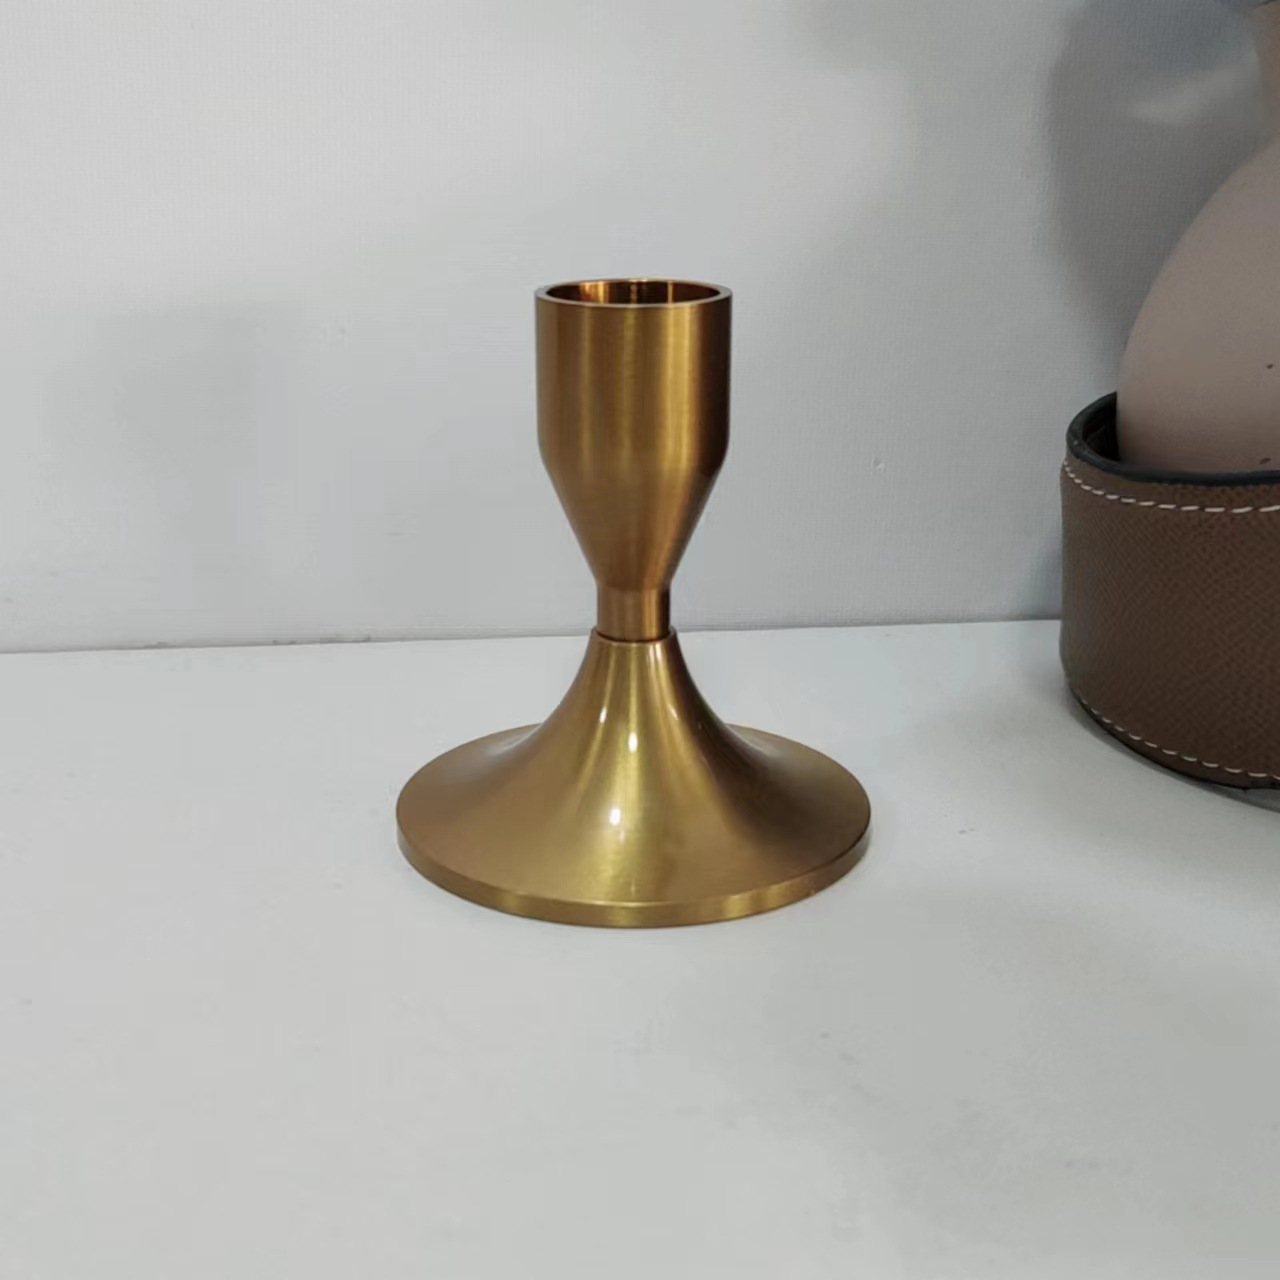 Light Luxury European-Style Complex Classical Brass Household Aluminum Candlestick Decoration Metal Romantic Candlelight Dinner Table Ornaments